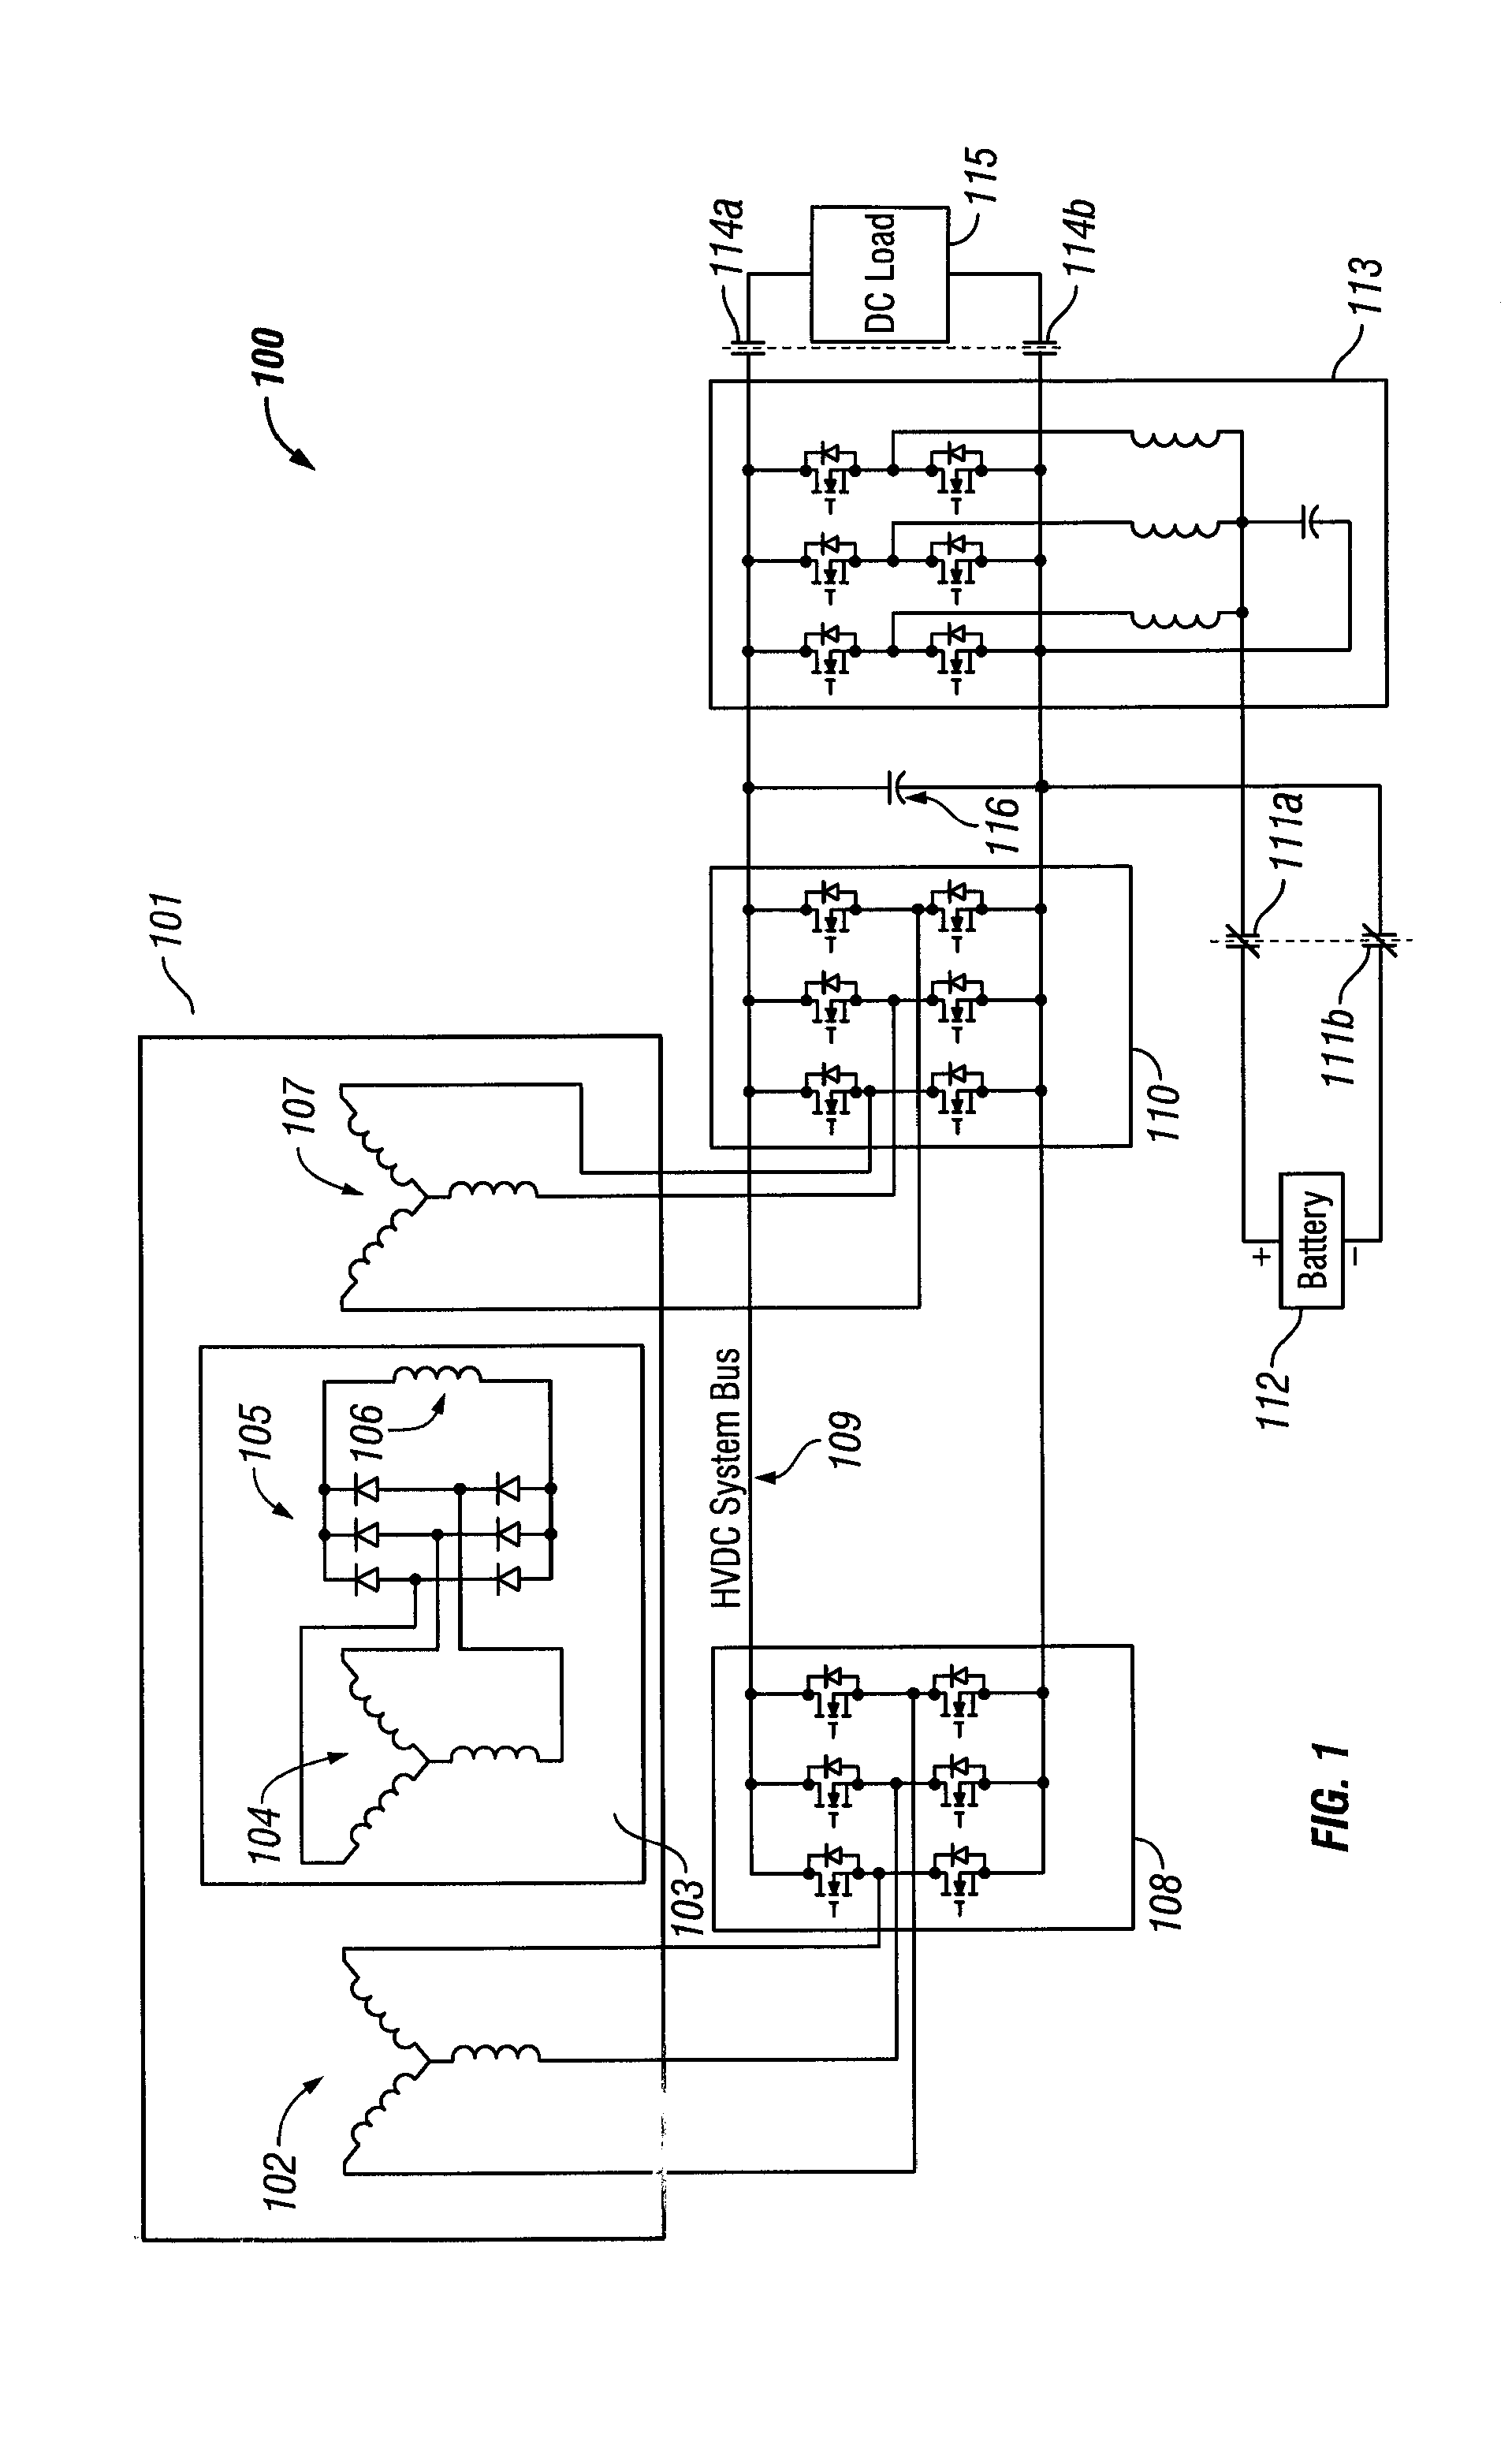 Electric Power Generating System with Boost Converter/Synchronous Active Filter